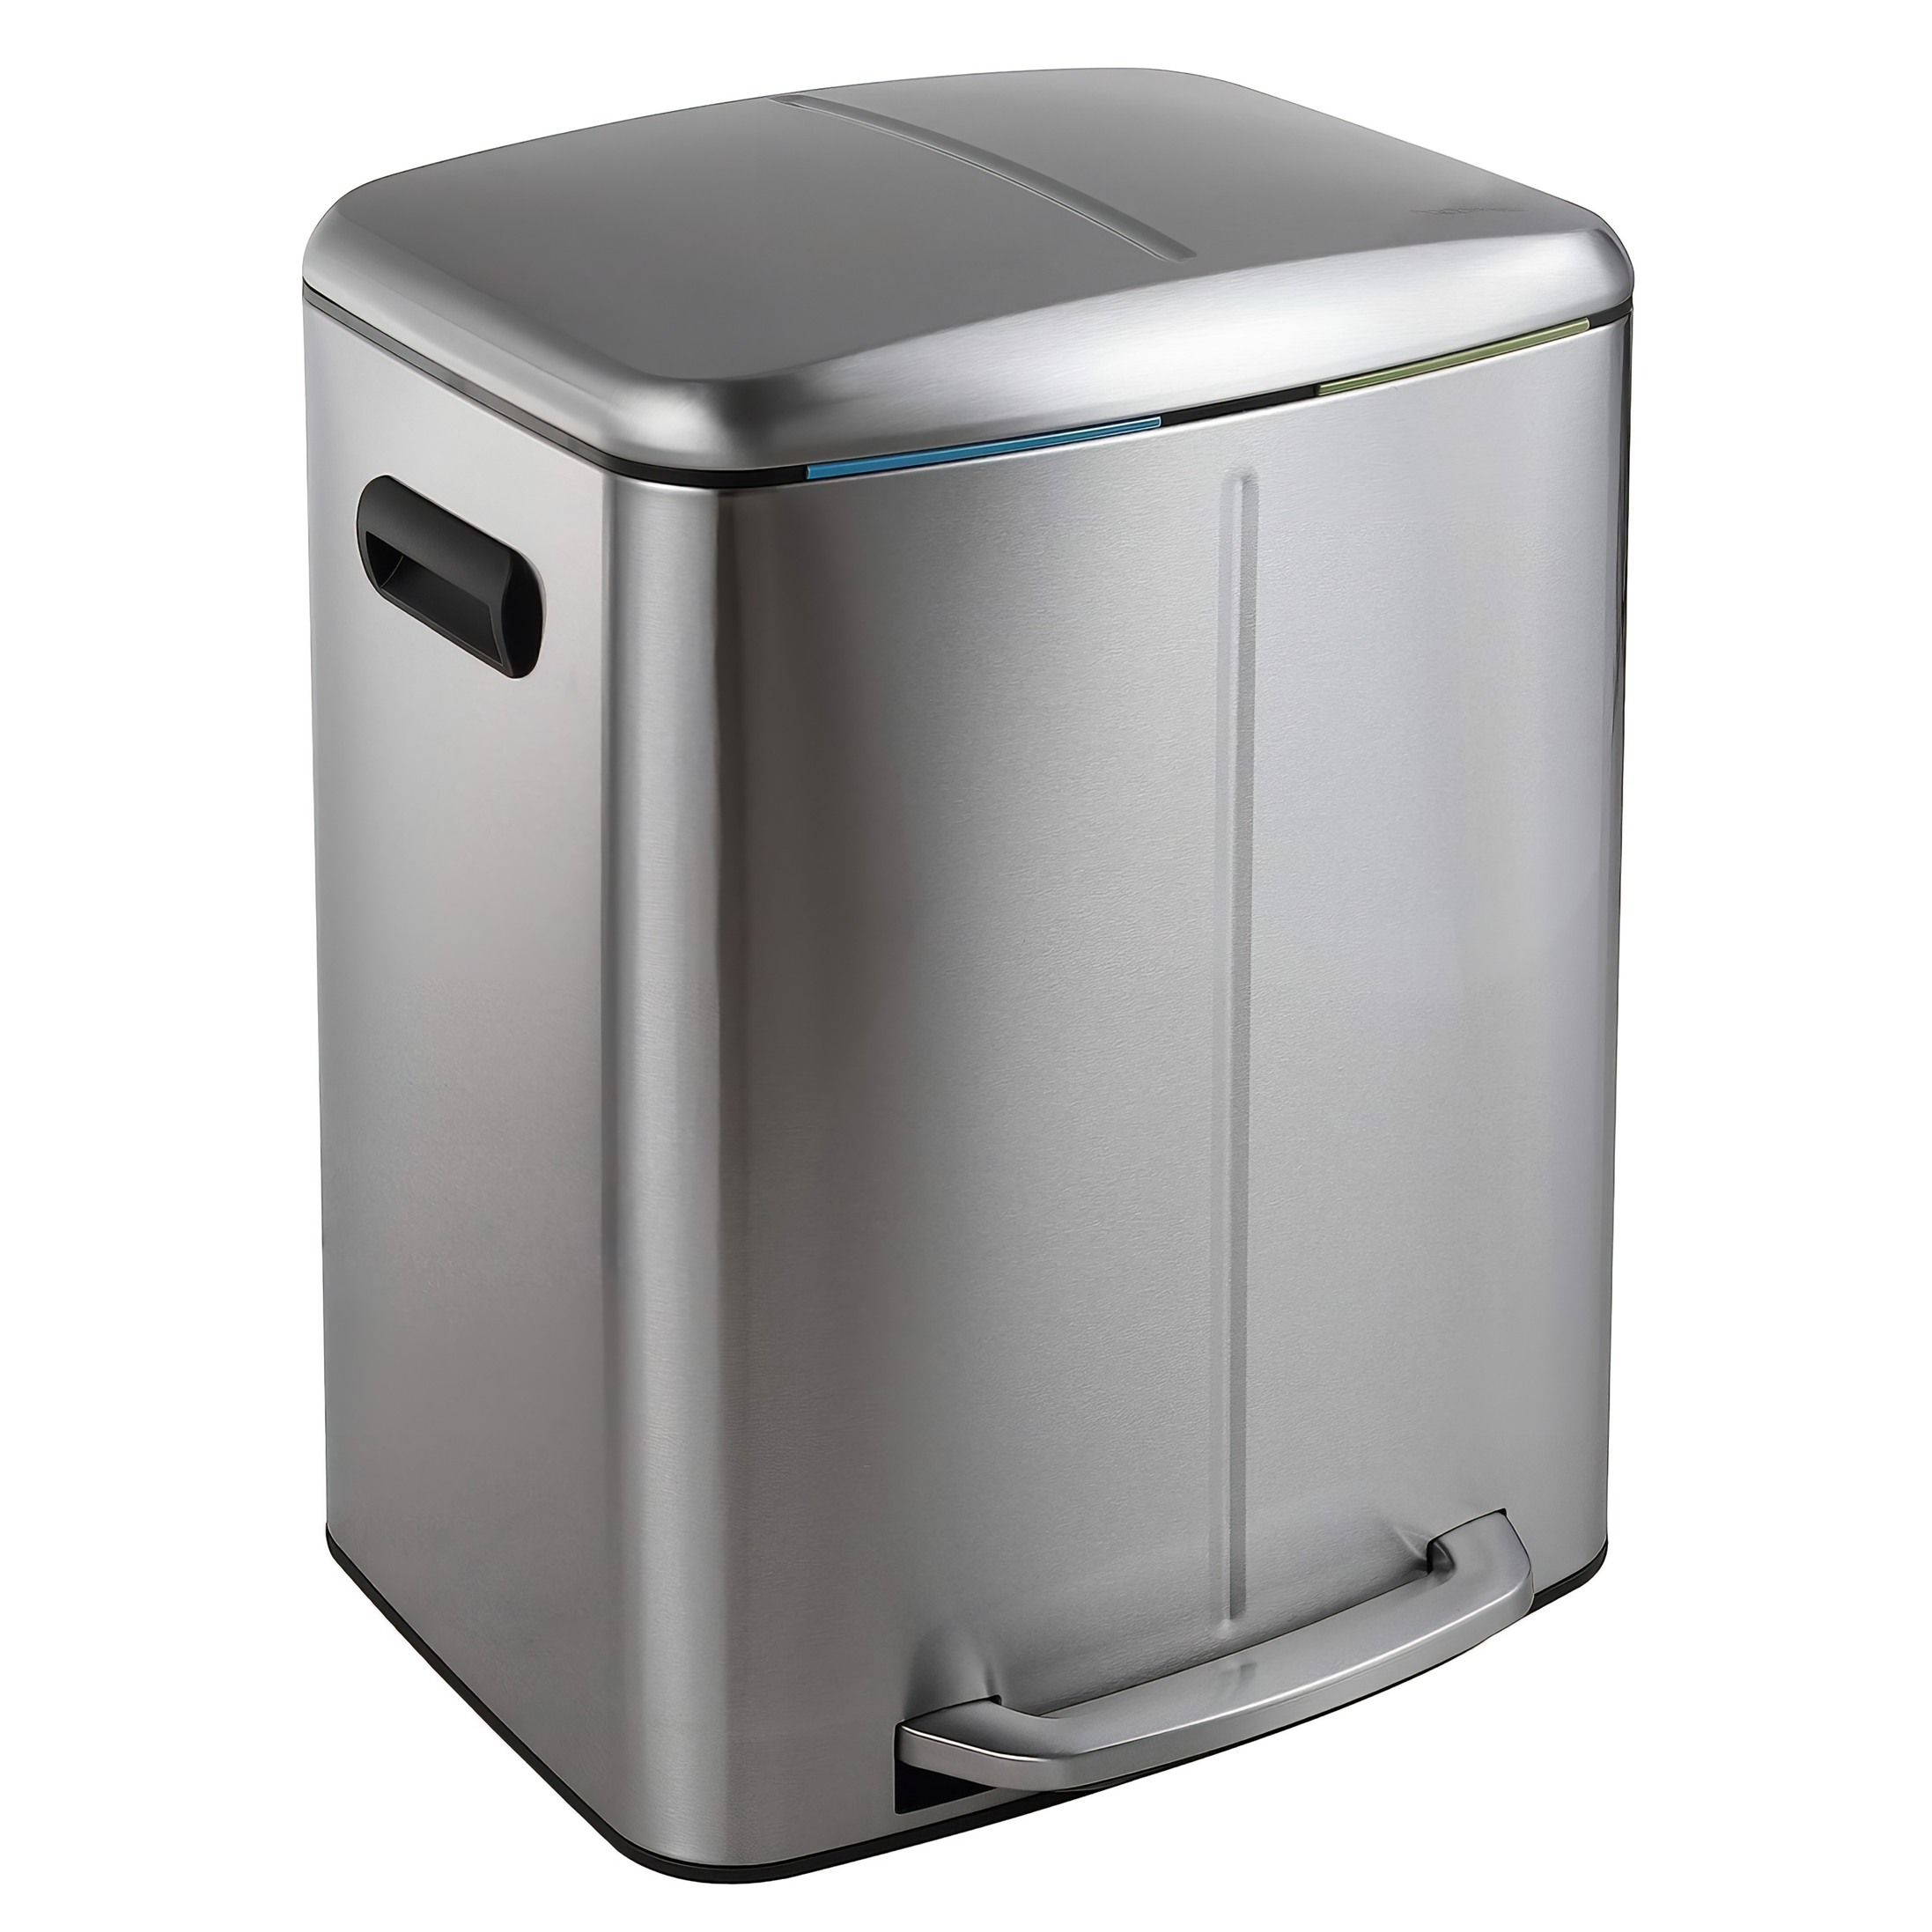 Stainless Steel 2 Compartment Pedal Bin – 2 x 20L